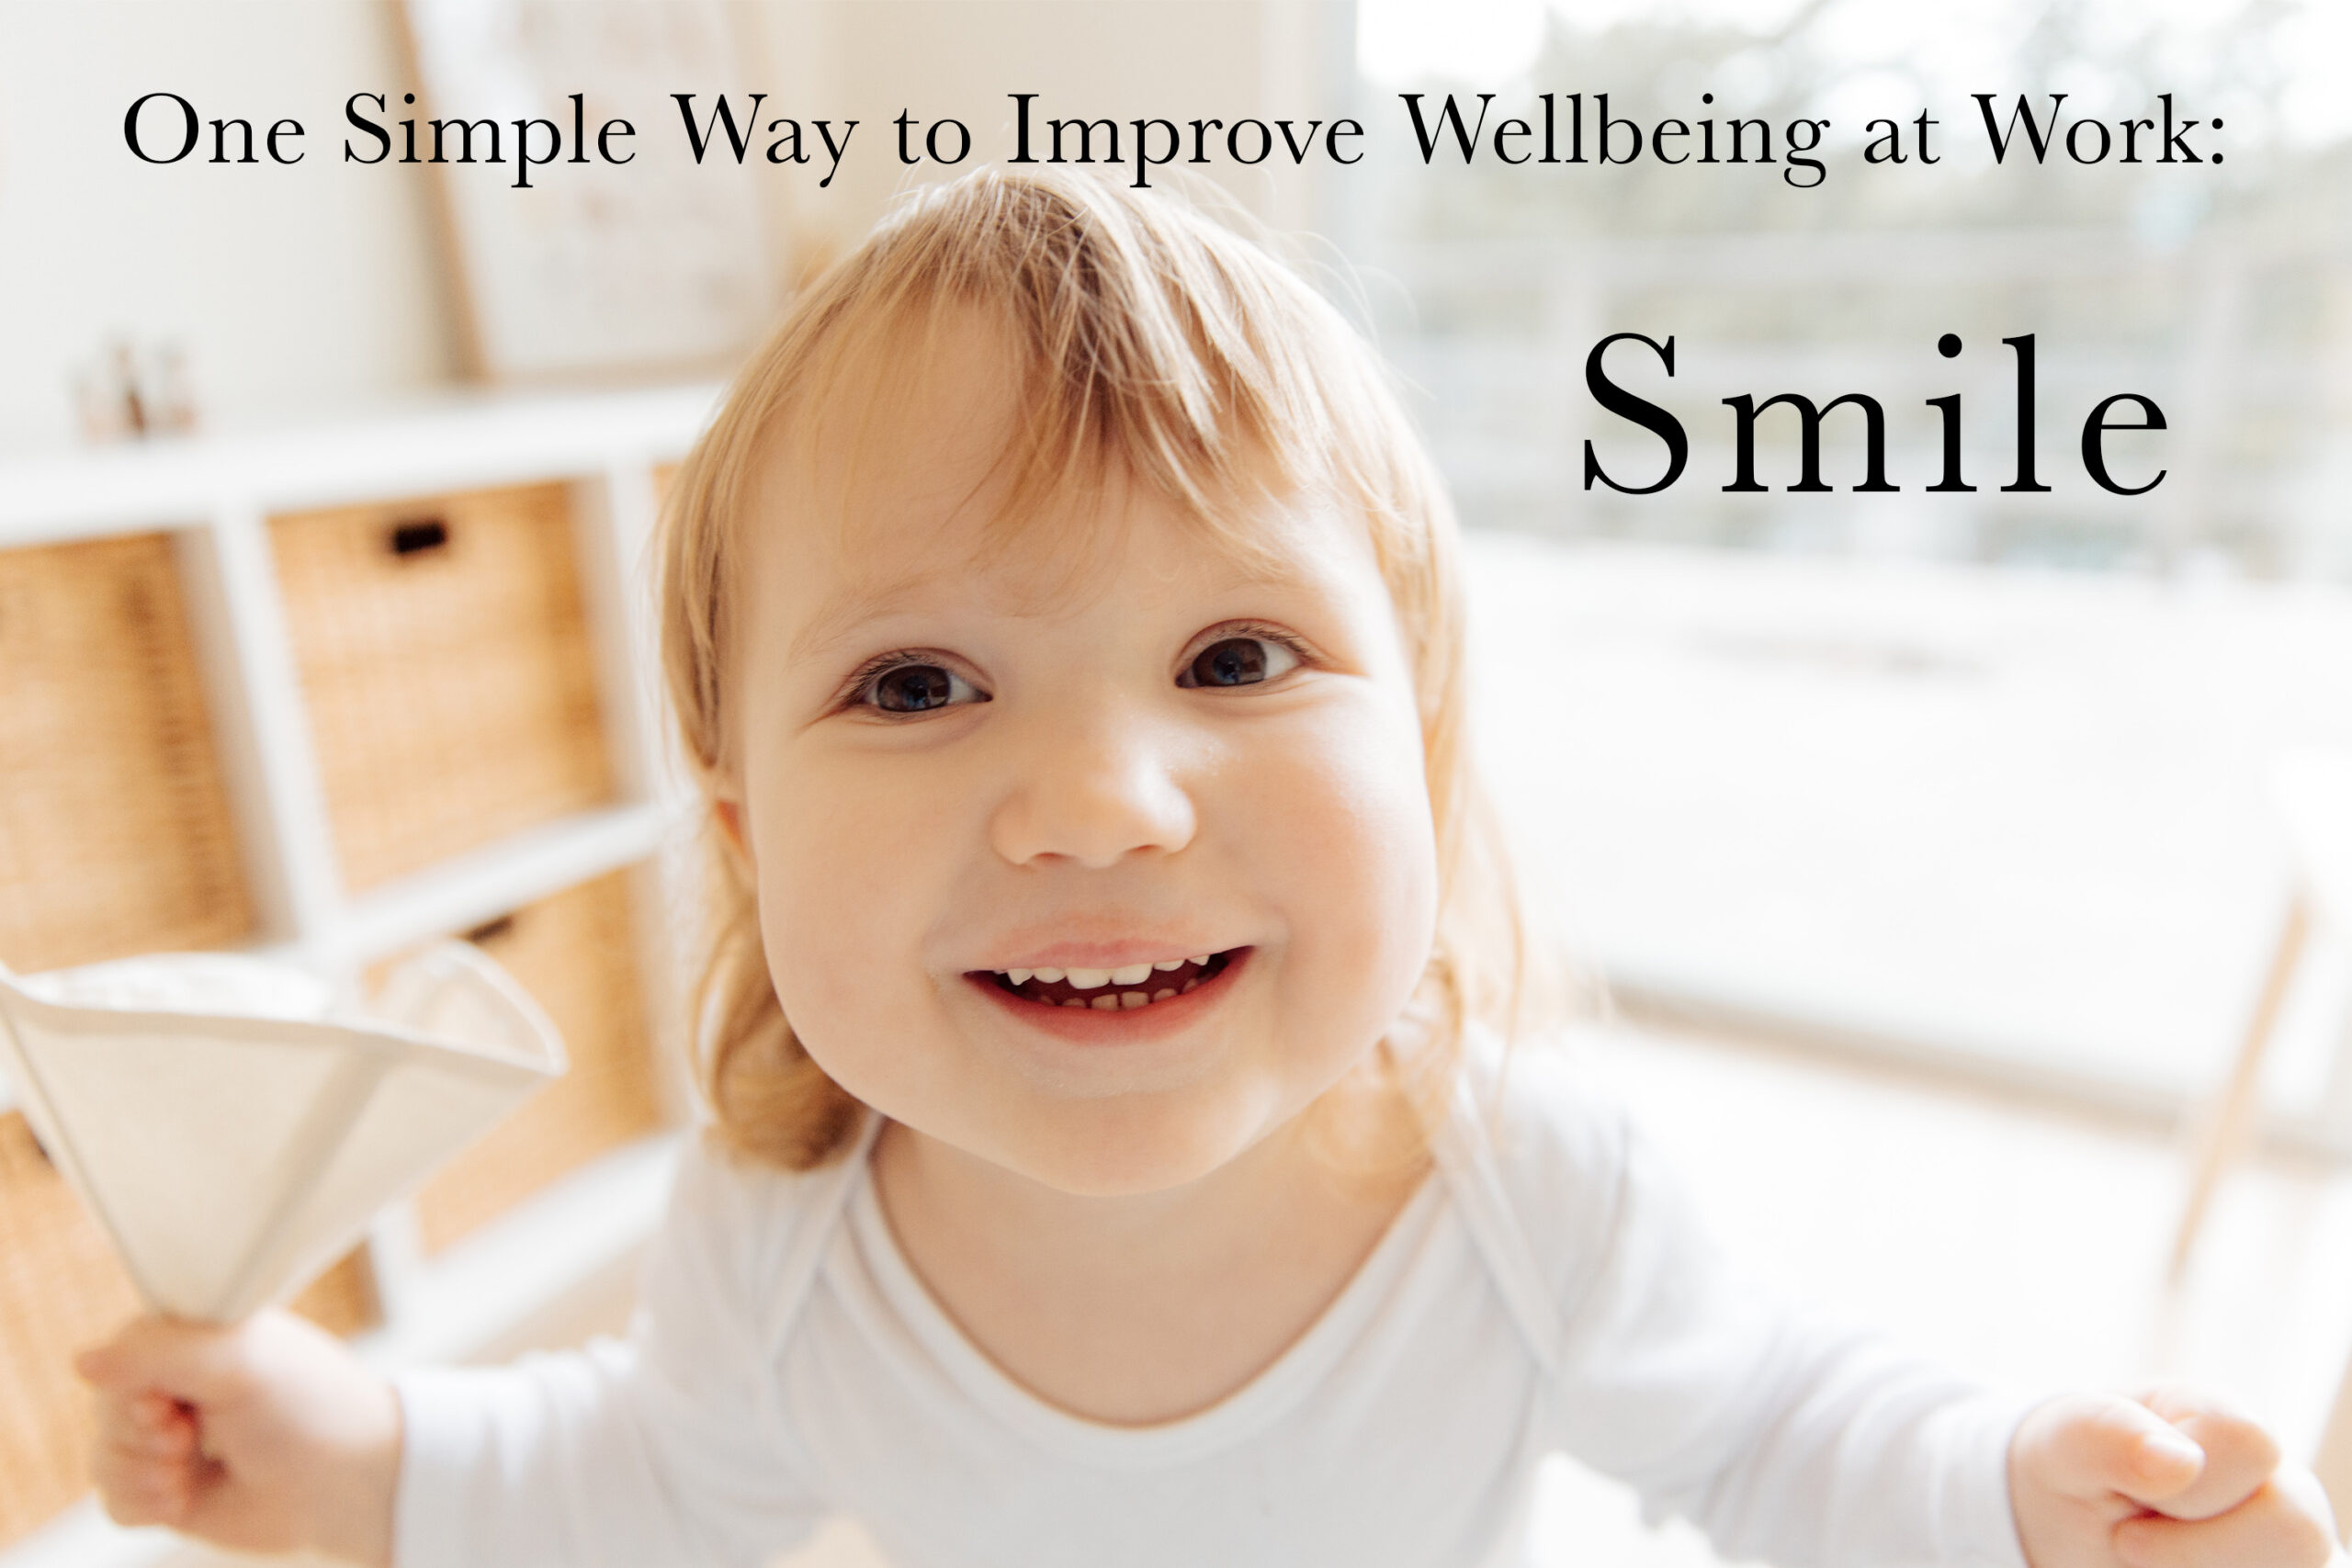 One Simple Way to Improve Wellbeing at Work: Smile